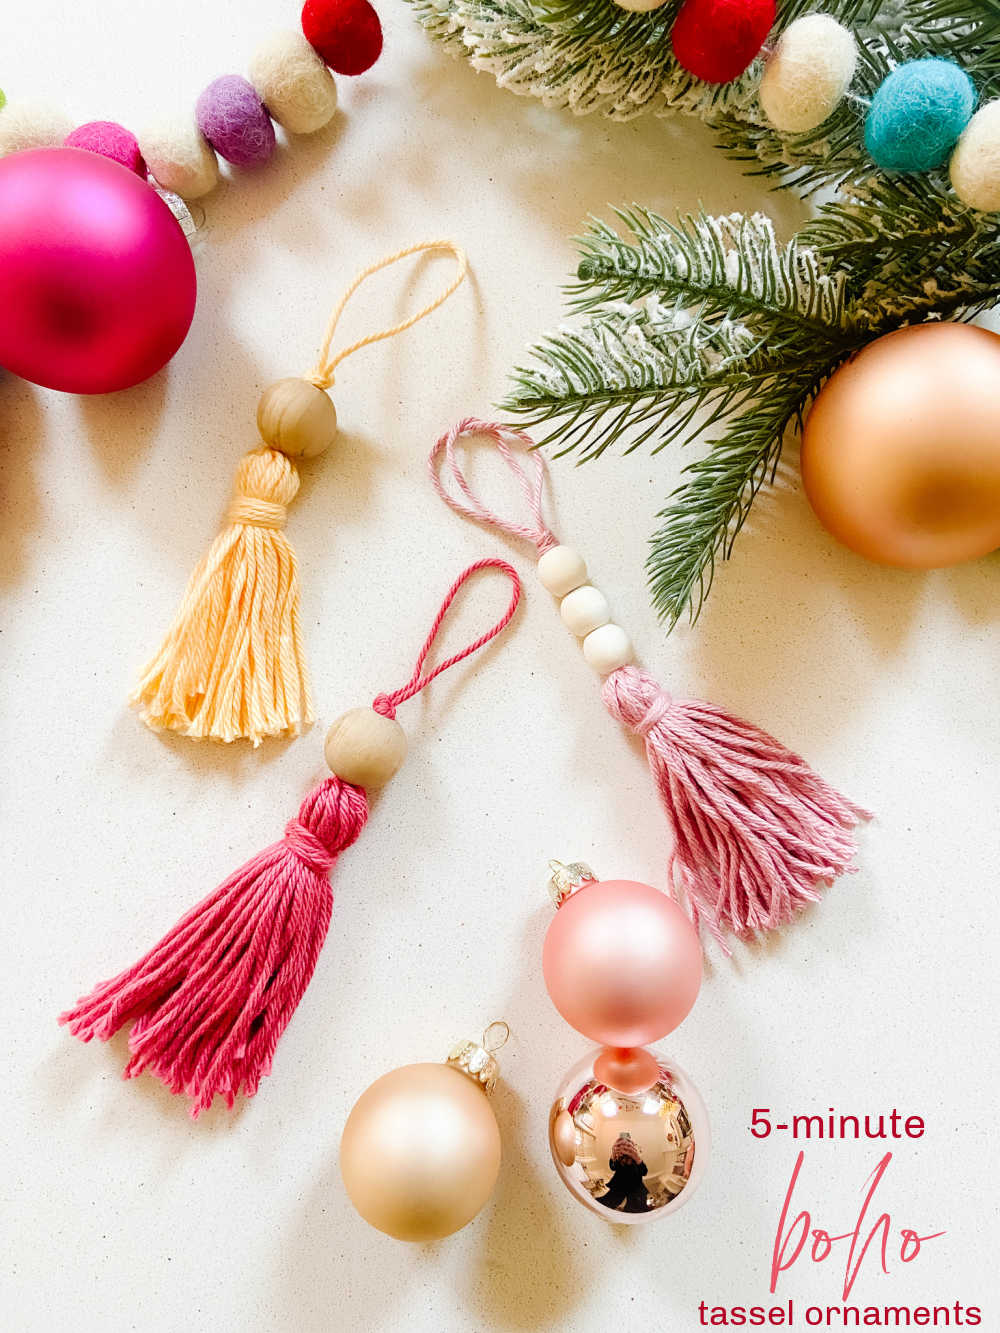 Short on time? No worries! These boho tassel and wood ornaments can be whipped up in under 5 minutes. Choose your favorite colors, get creative, and enjoy the instant bohemian vibe they bring to your Christmas tree. Plus, they make fantastic gift toppers!